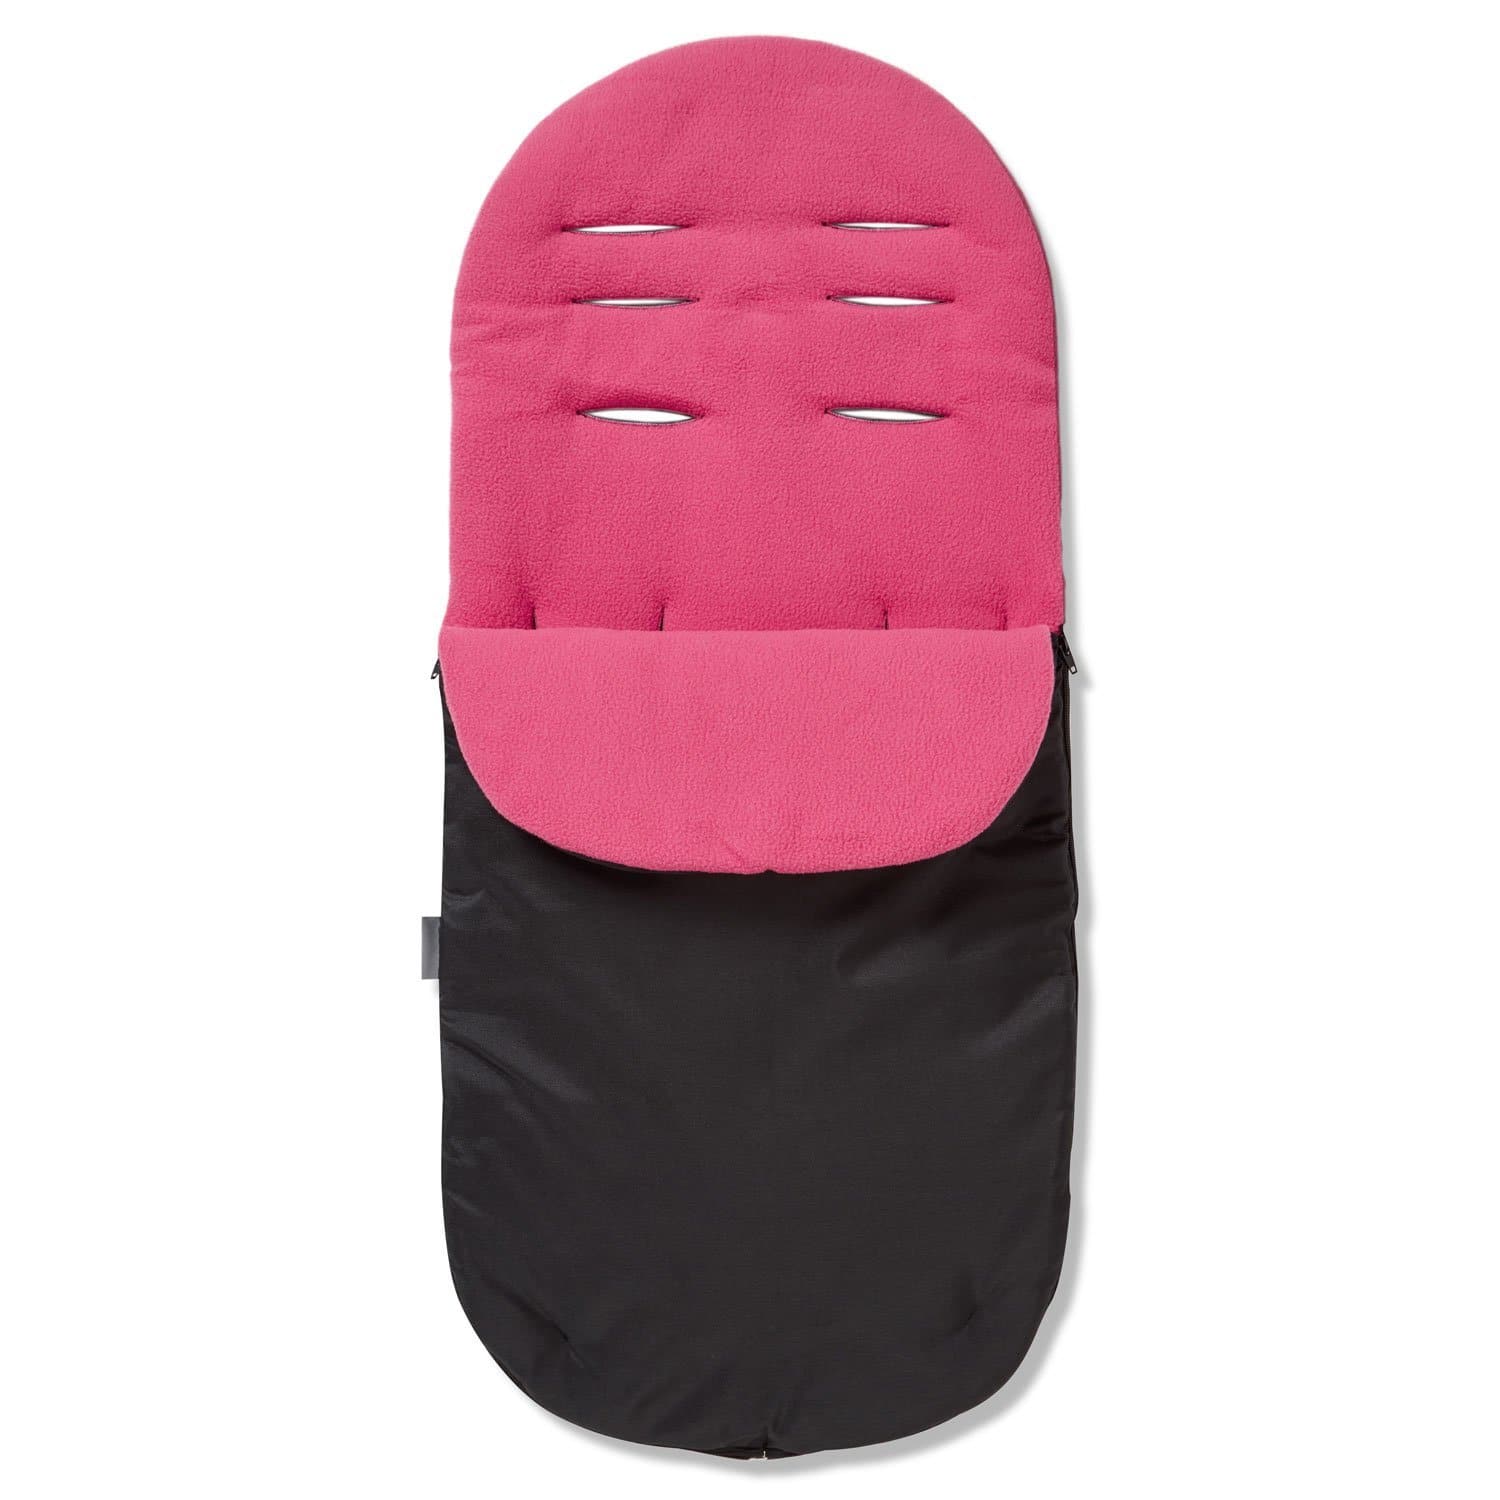 Footmuff / Cosy Toes Compatible with Egg - Dark Pink / Fits All Models | For Your Little One